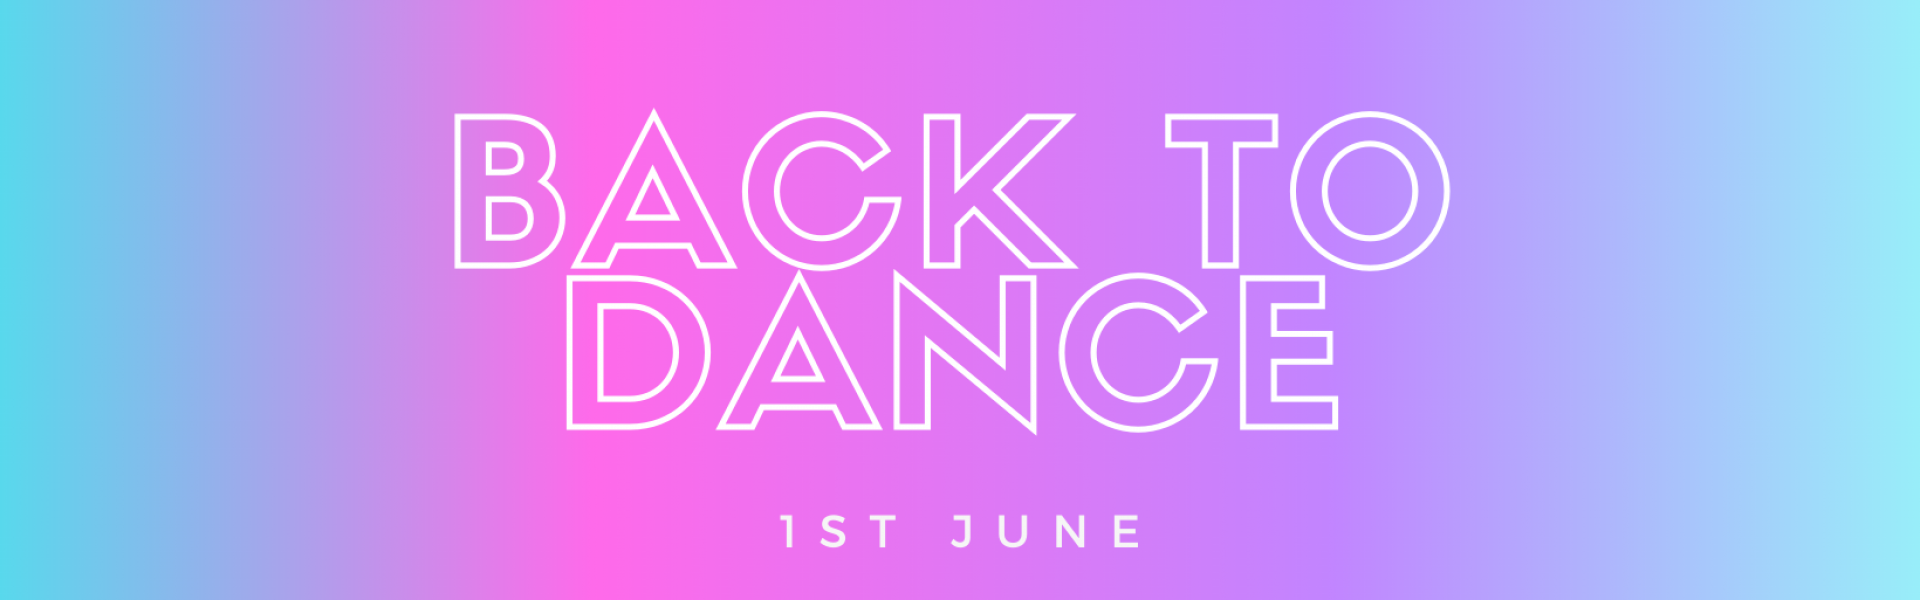 Back to Dance - 1st June